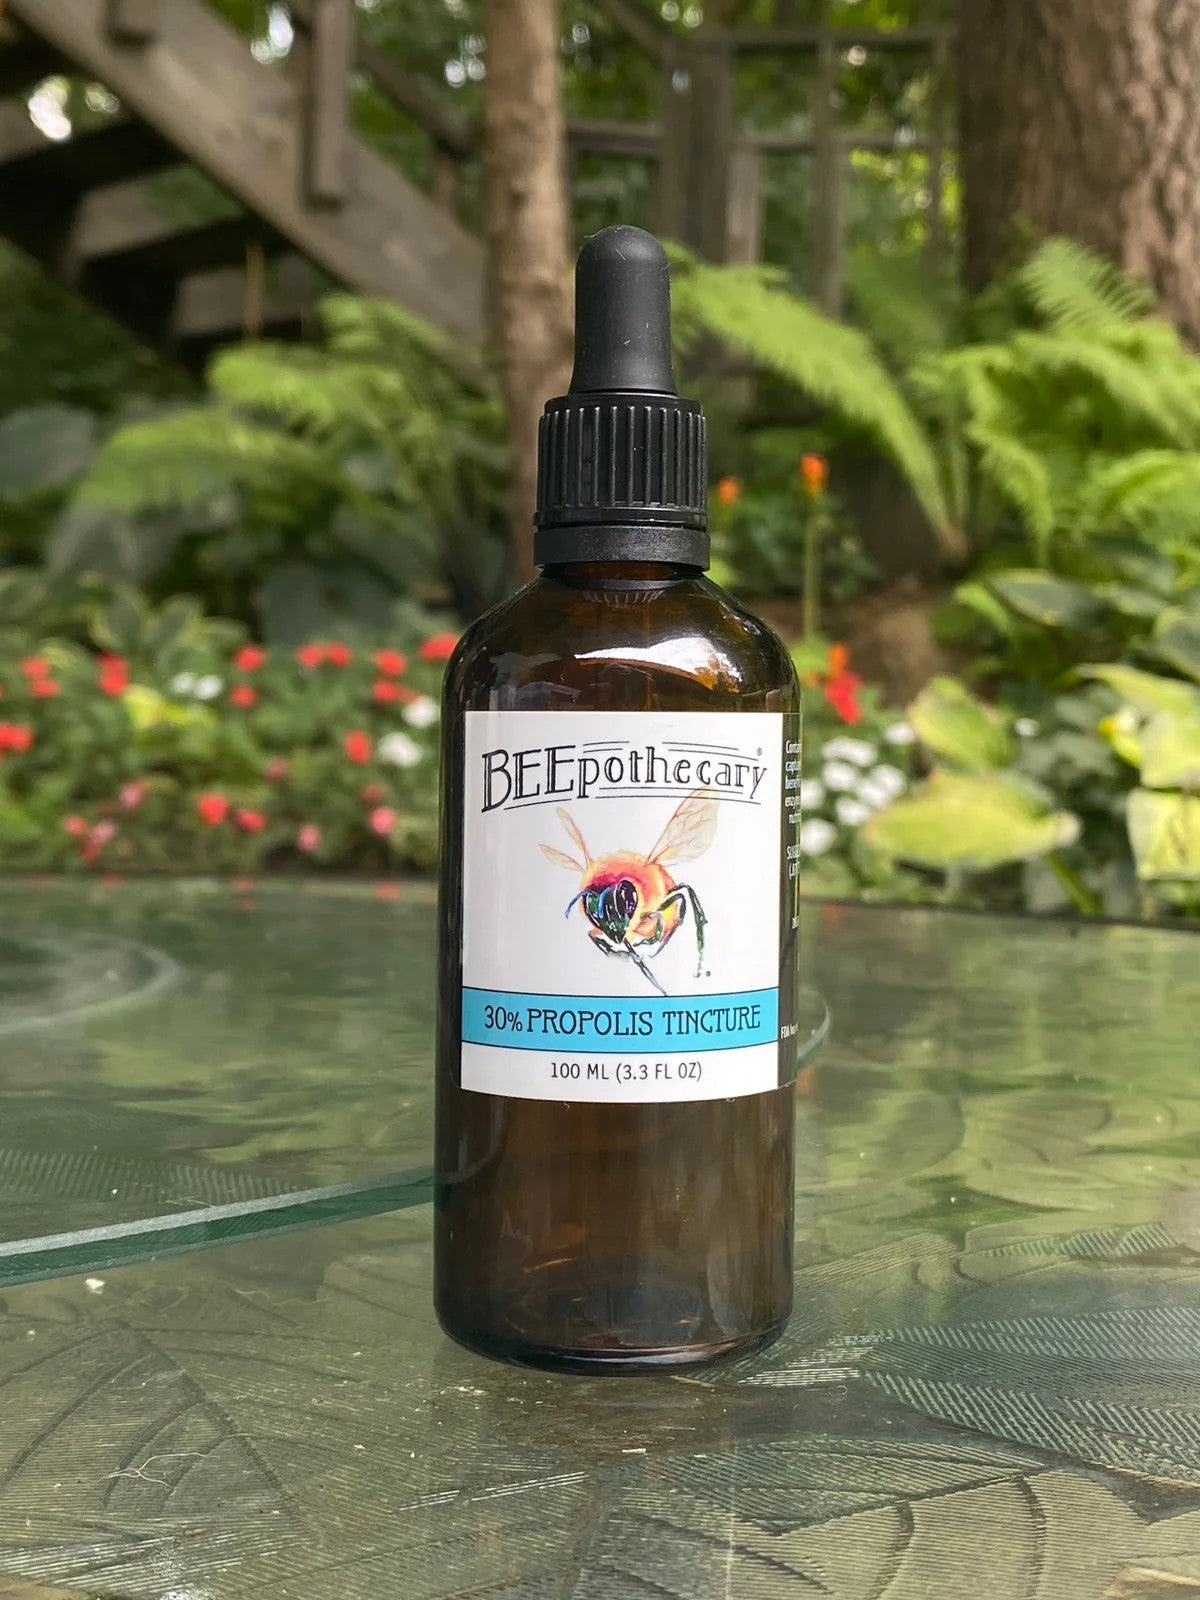 BEEpothecary 30% Propolis Tincture in 100 ml bottle with dropper